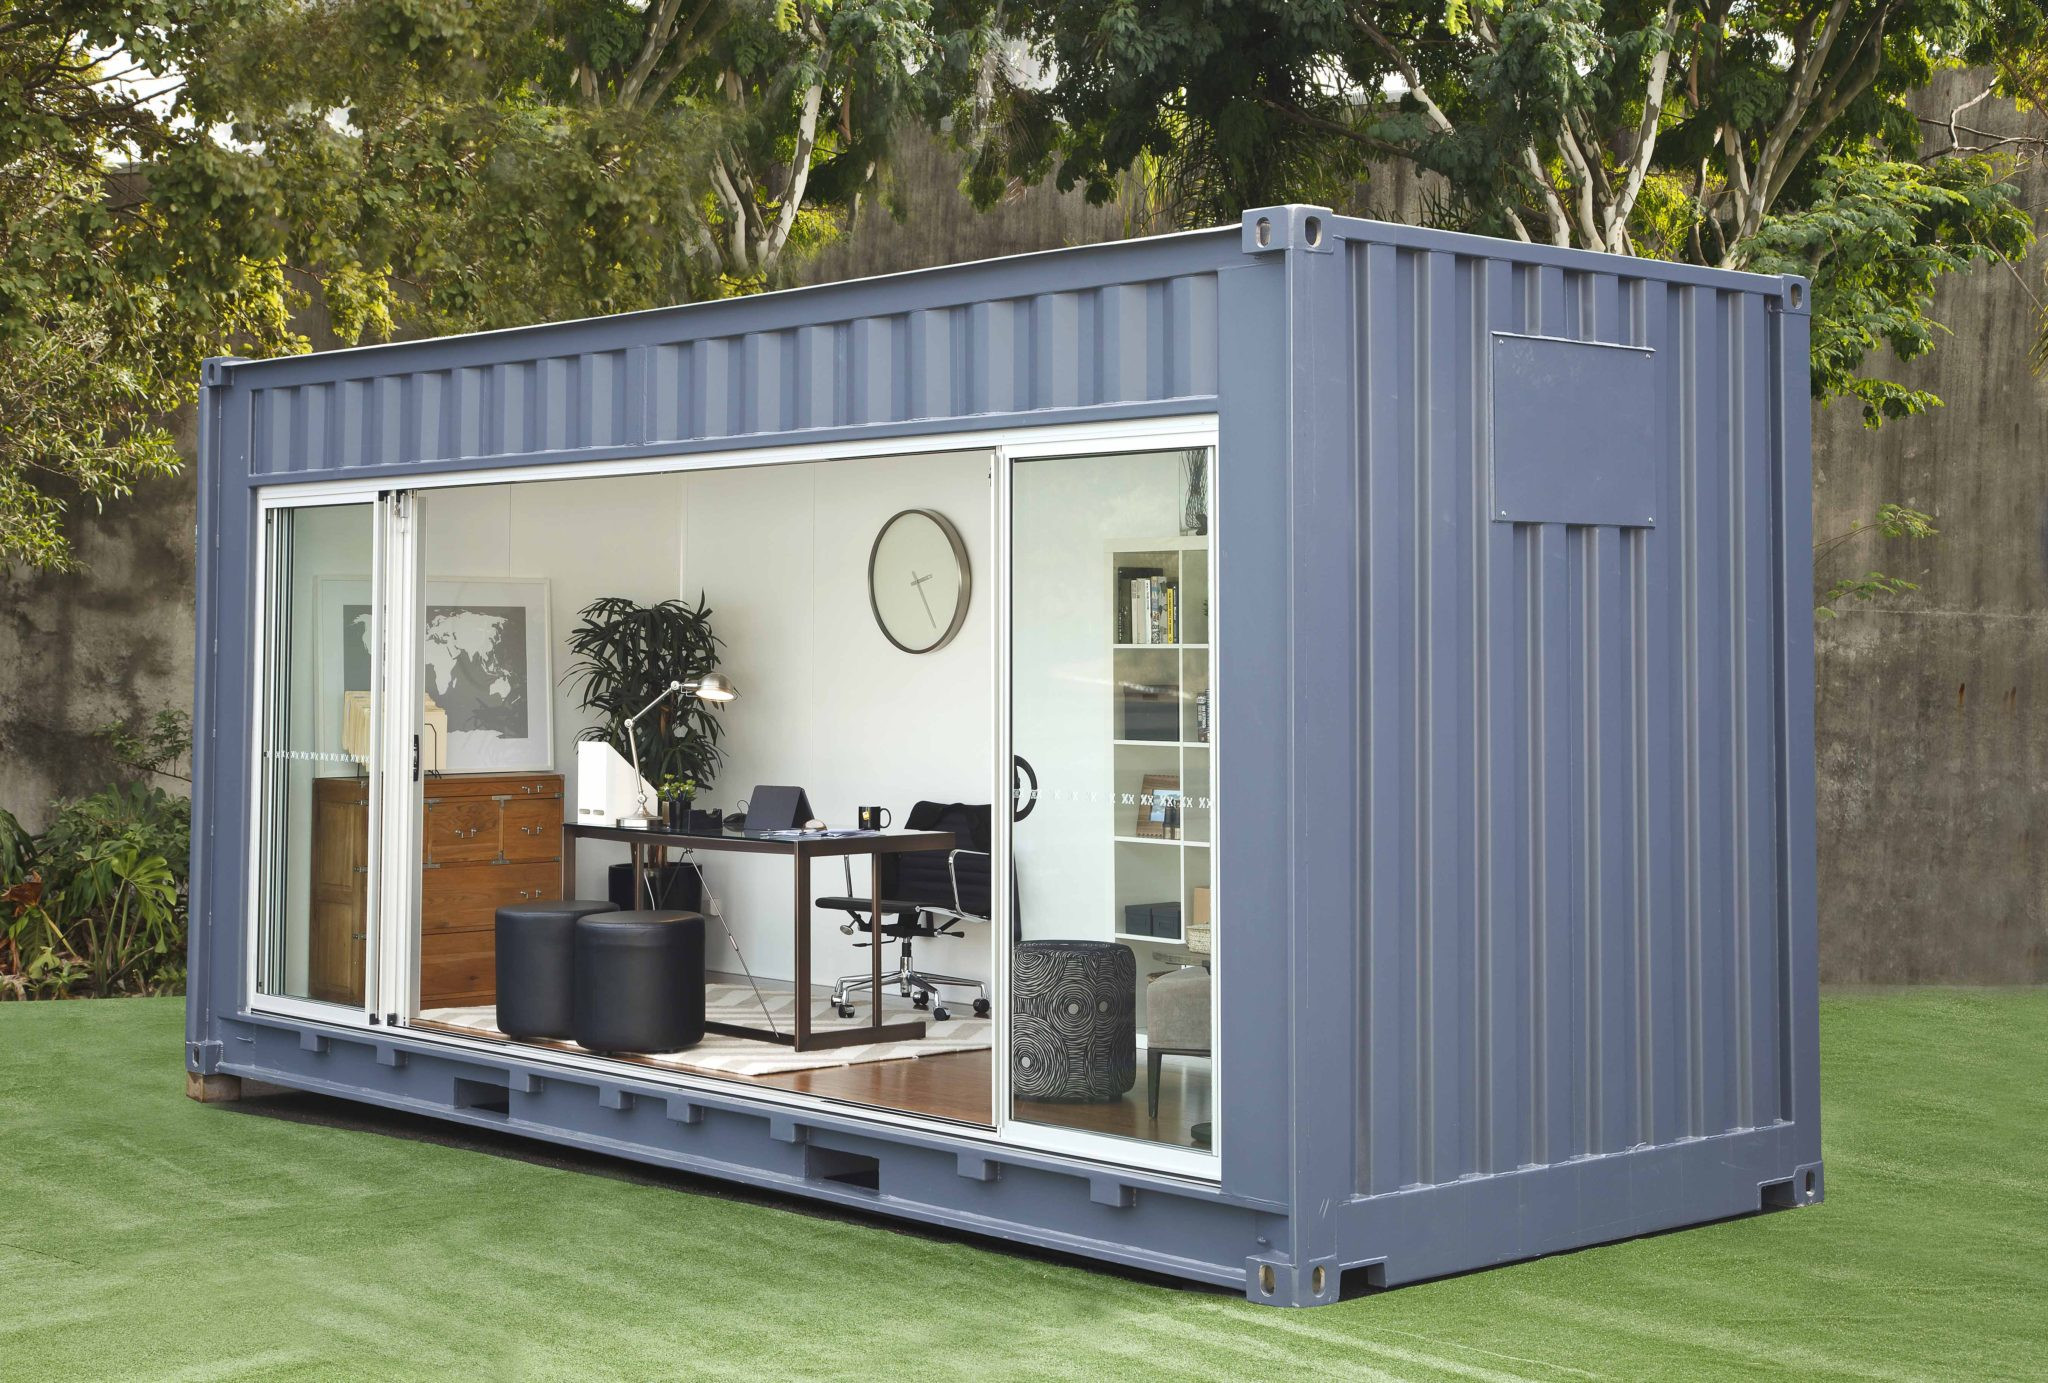 Bedroom Storage Containers
 Need extra room Rent a backyard shipping container The